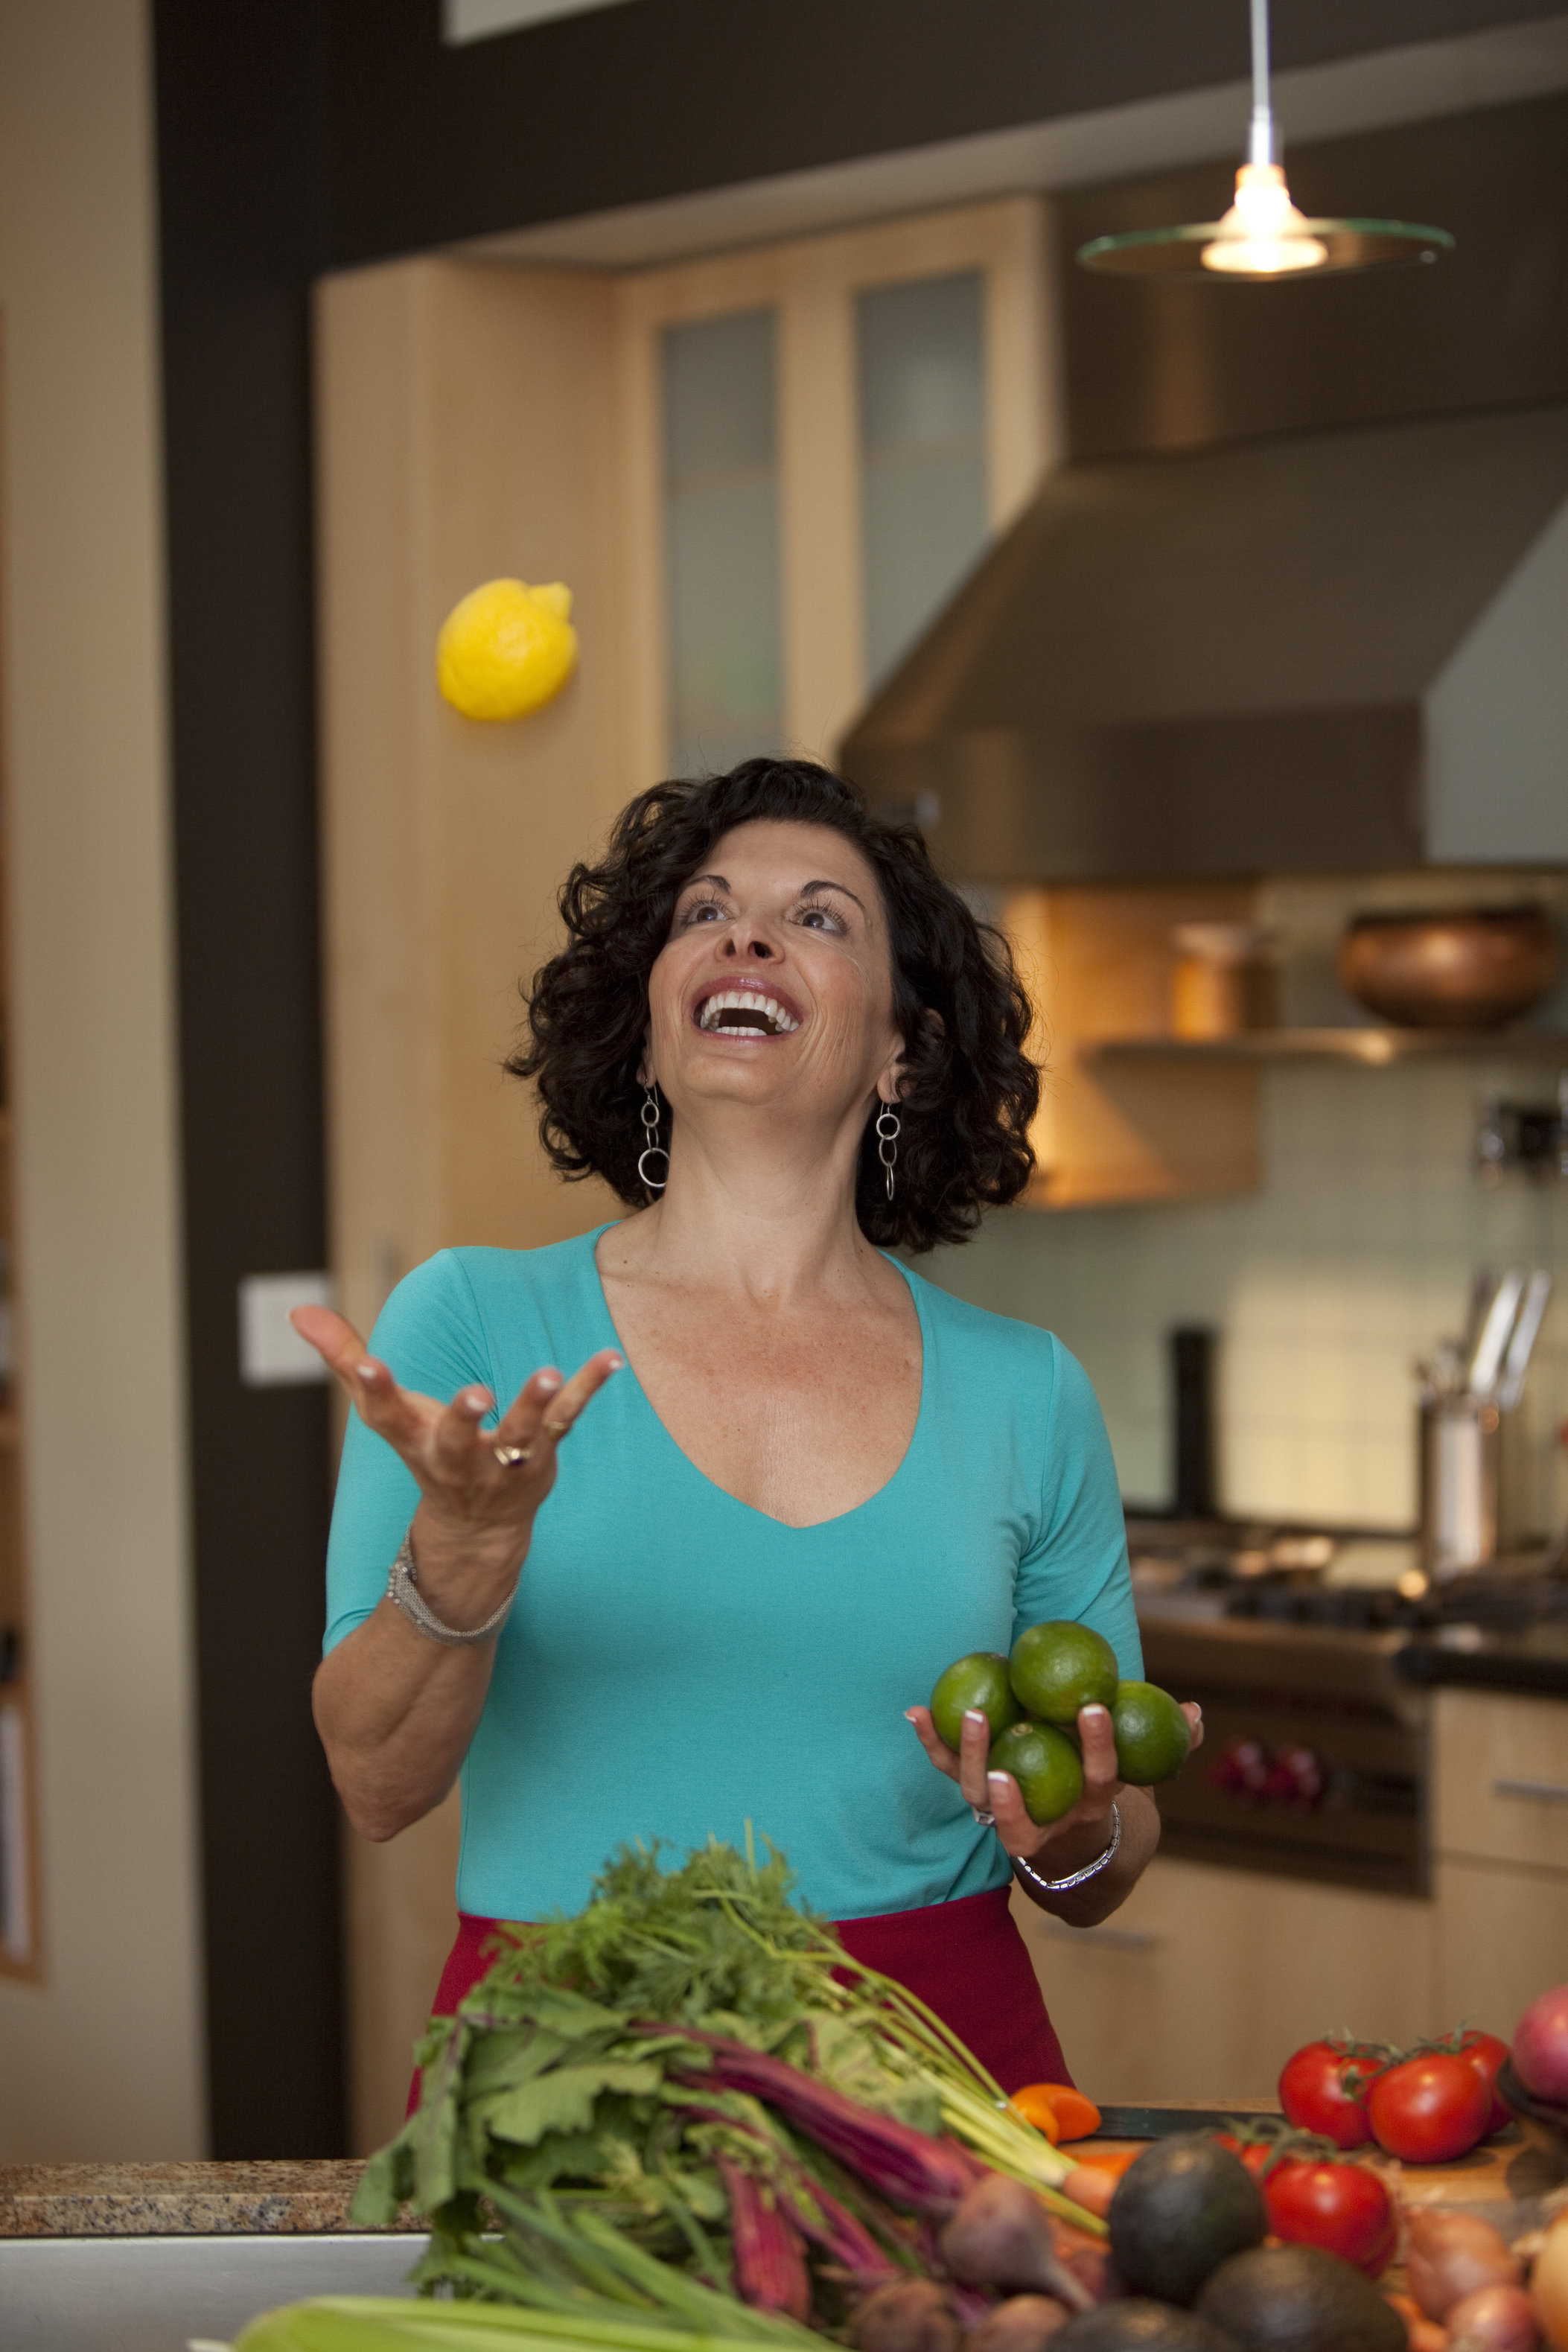 a woman tossing a lemon into the air in a kitchen setting, she is joyful